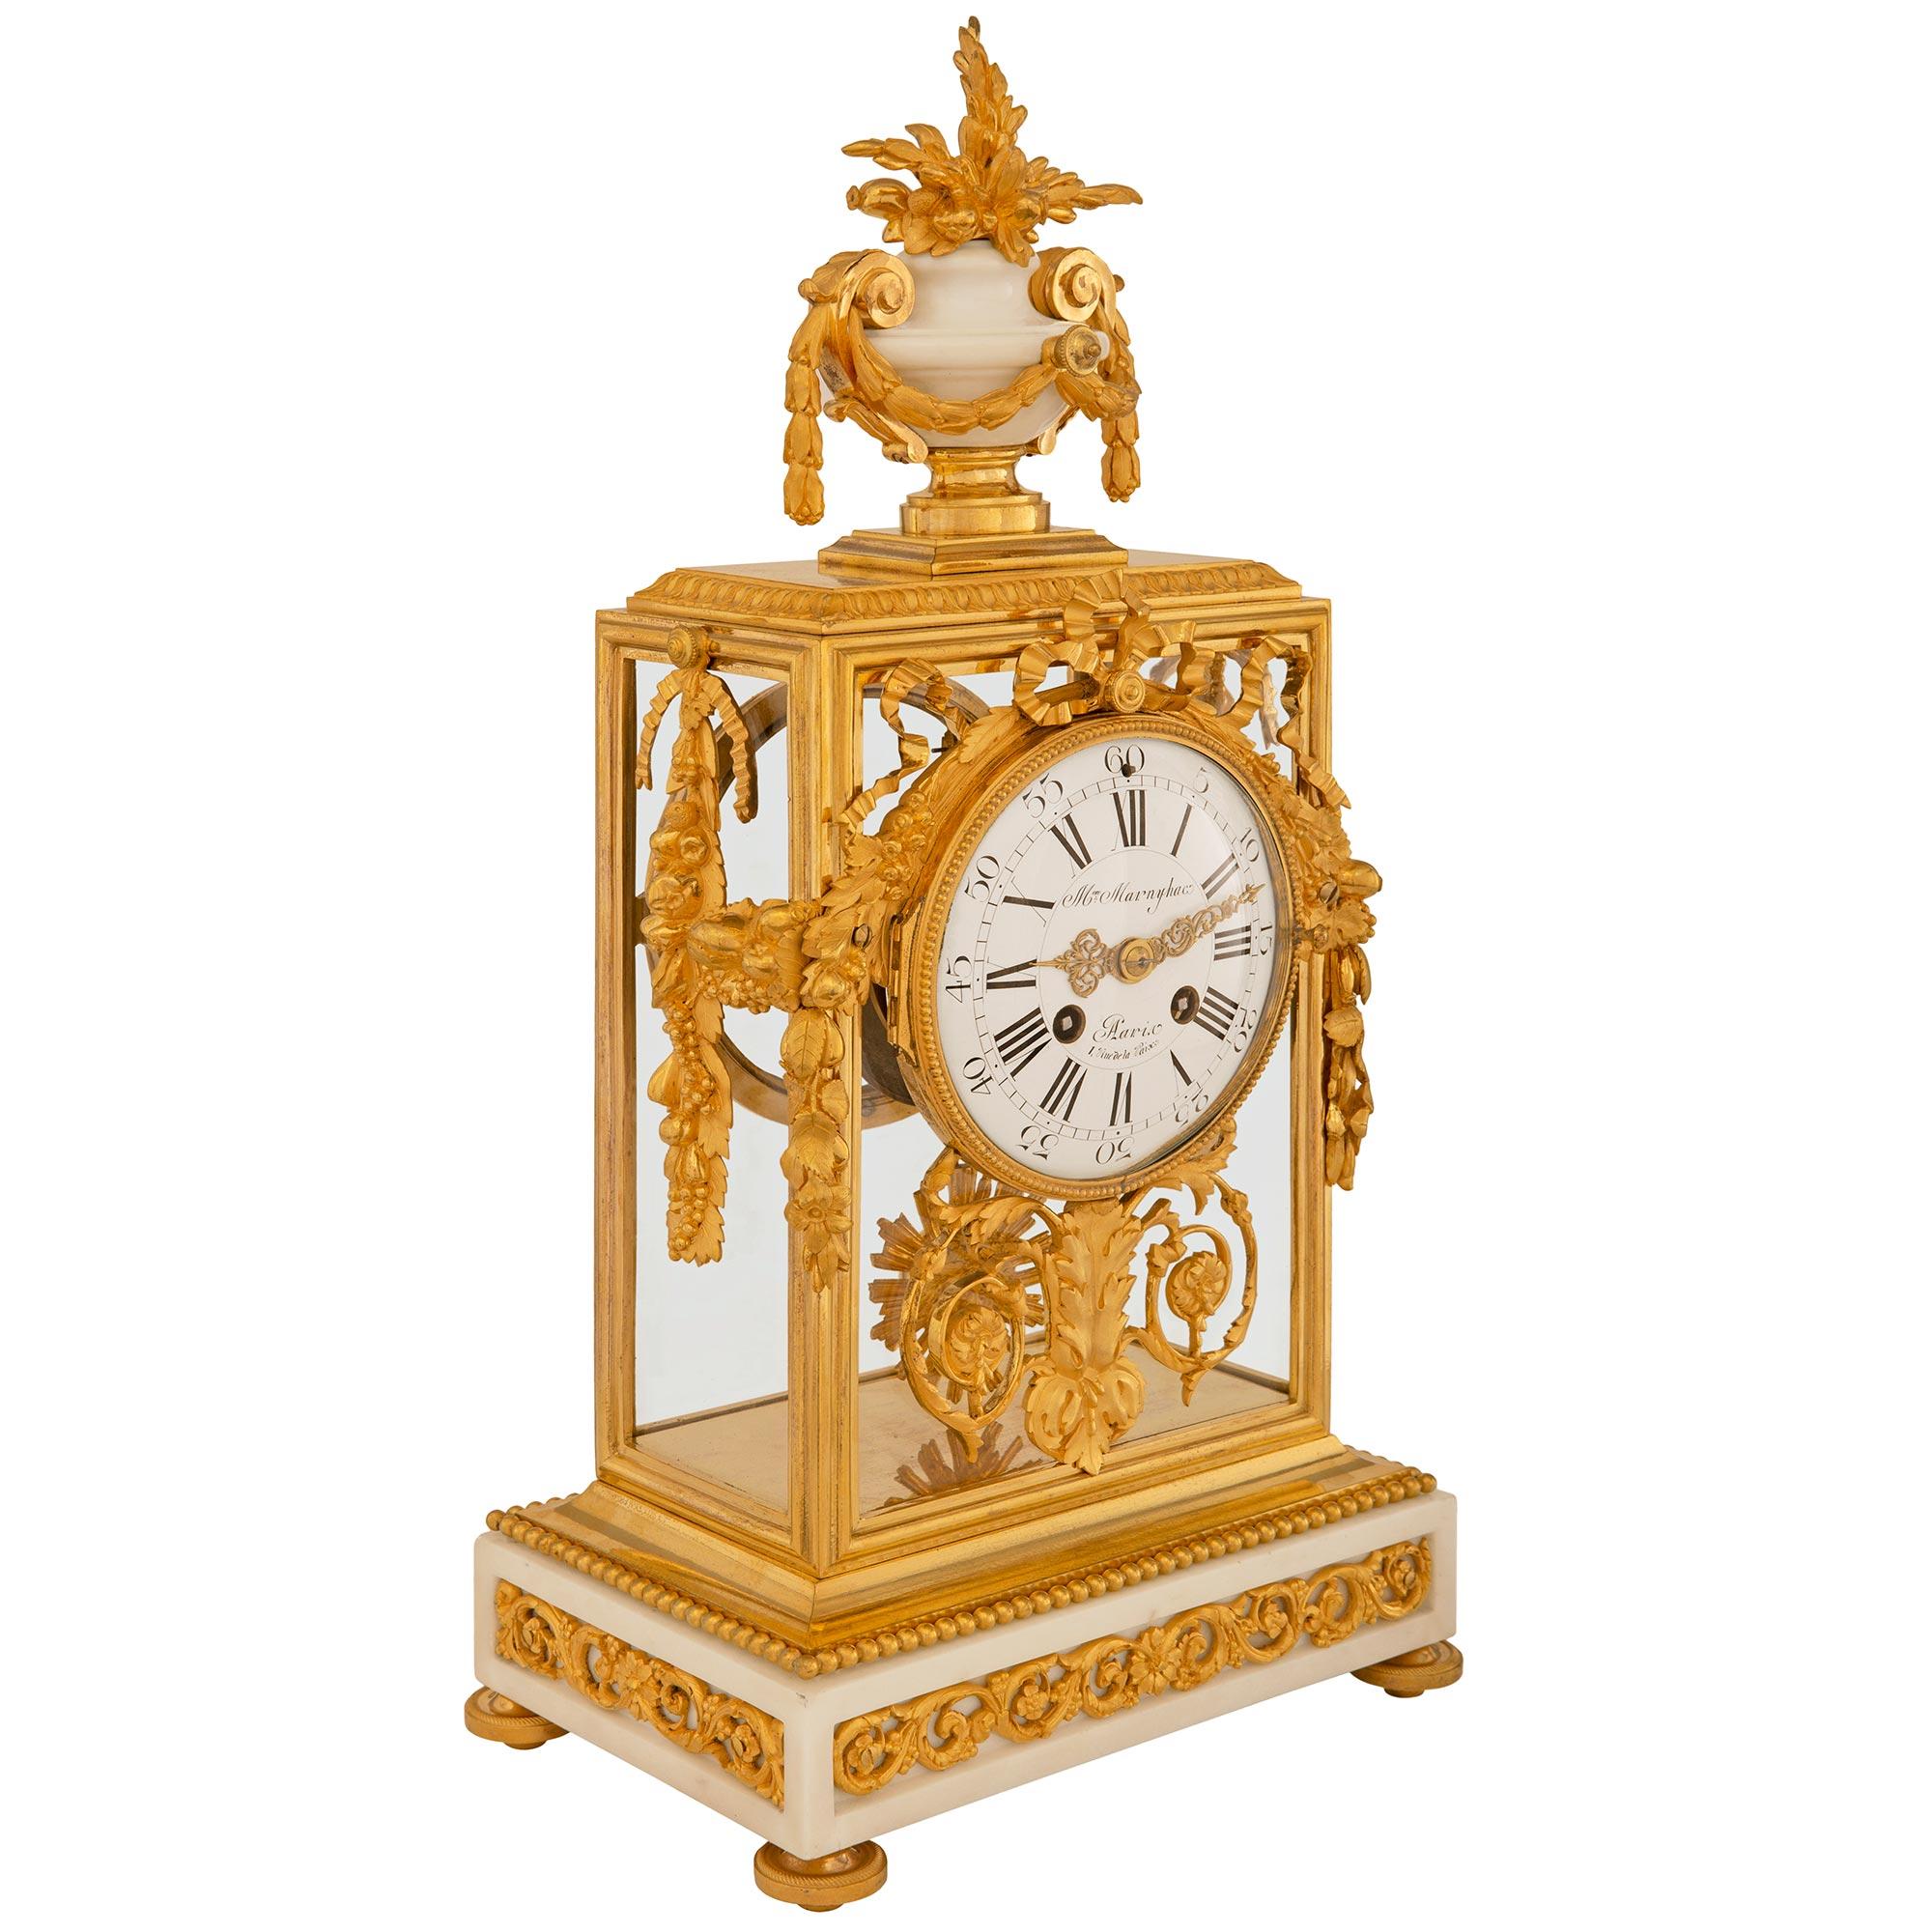 A stunning and high quality French 19th century Louis XVI st. Ormolu and white Carrara marble clock, signed Maison Marnyhac. This exquisite mantel clock is raised by a rectangular white Carrara marble base with four recessed panels containing Ormolu